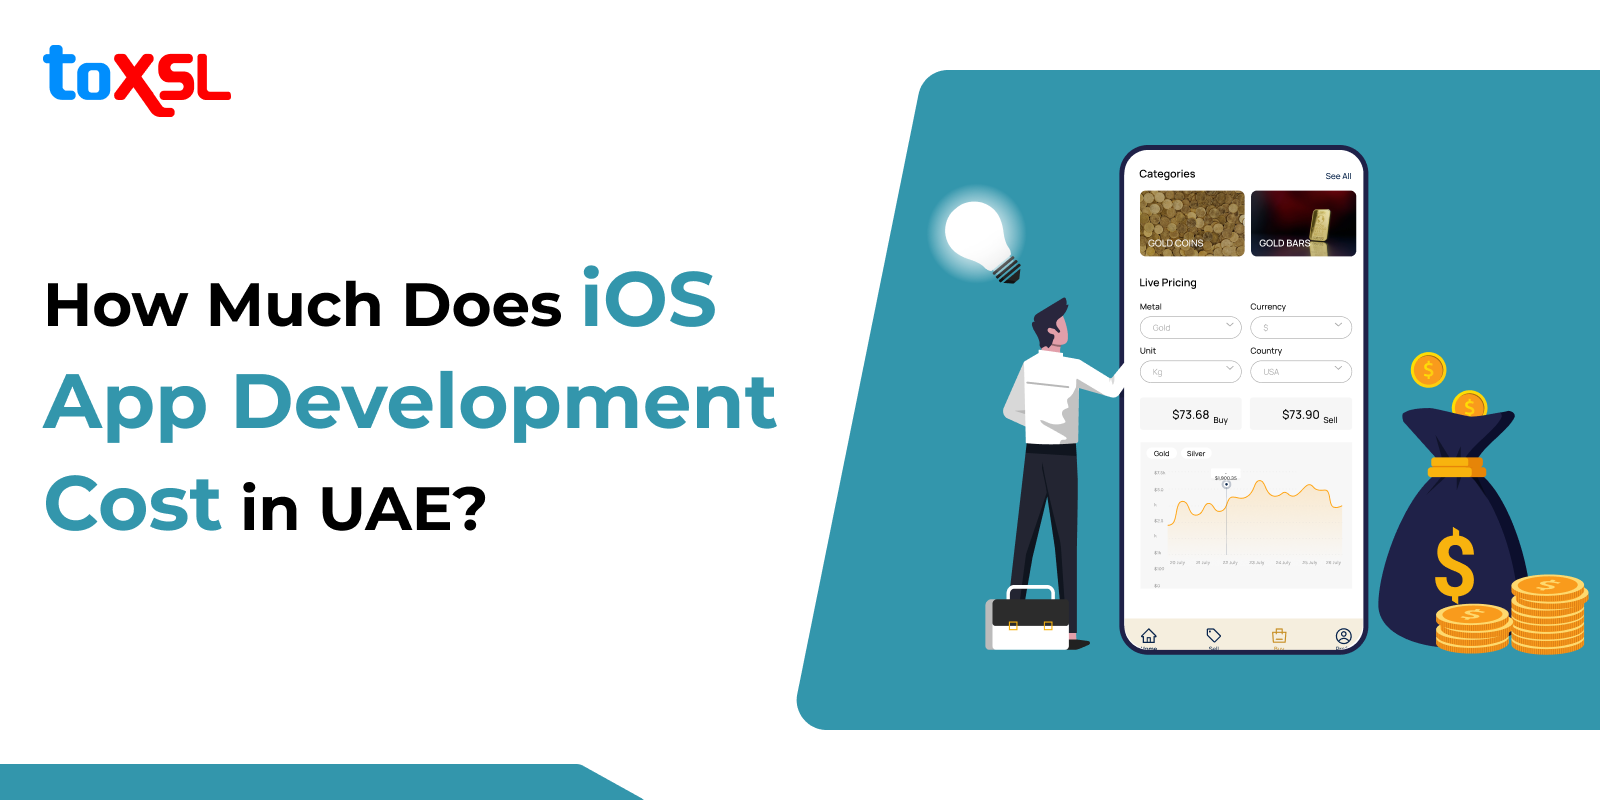 How Much Does iOS App Development Cost in UAE?